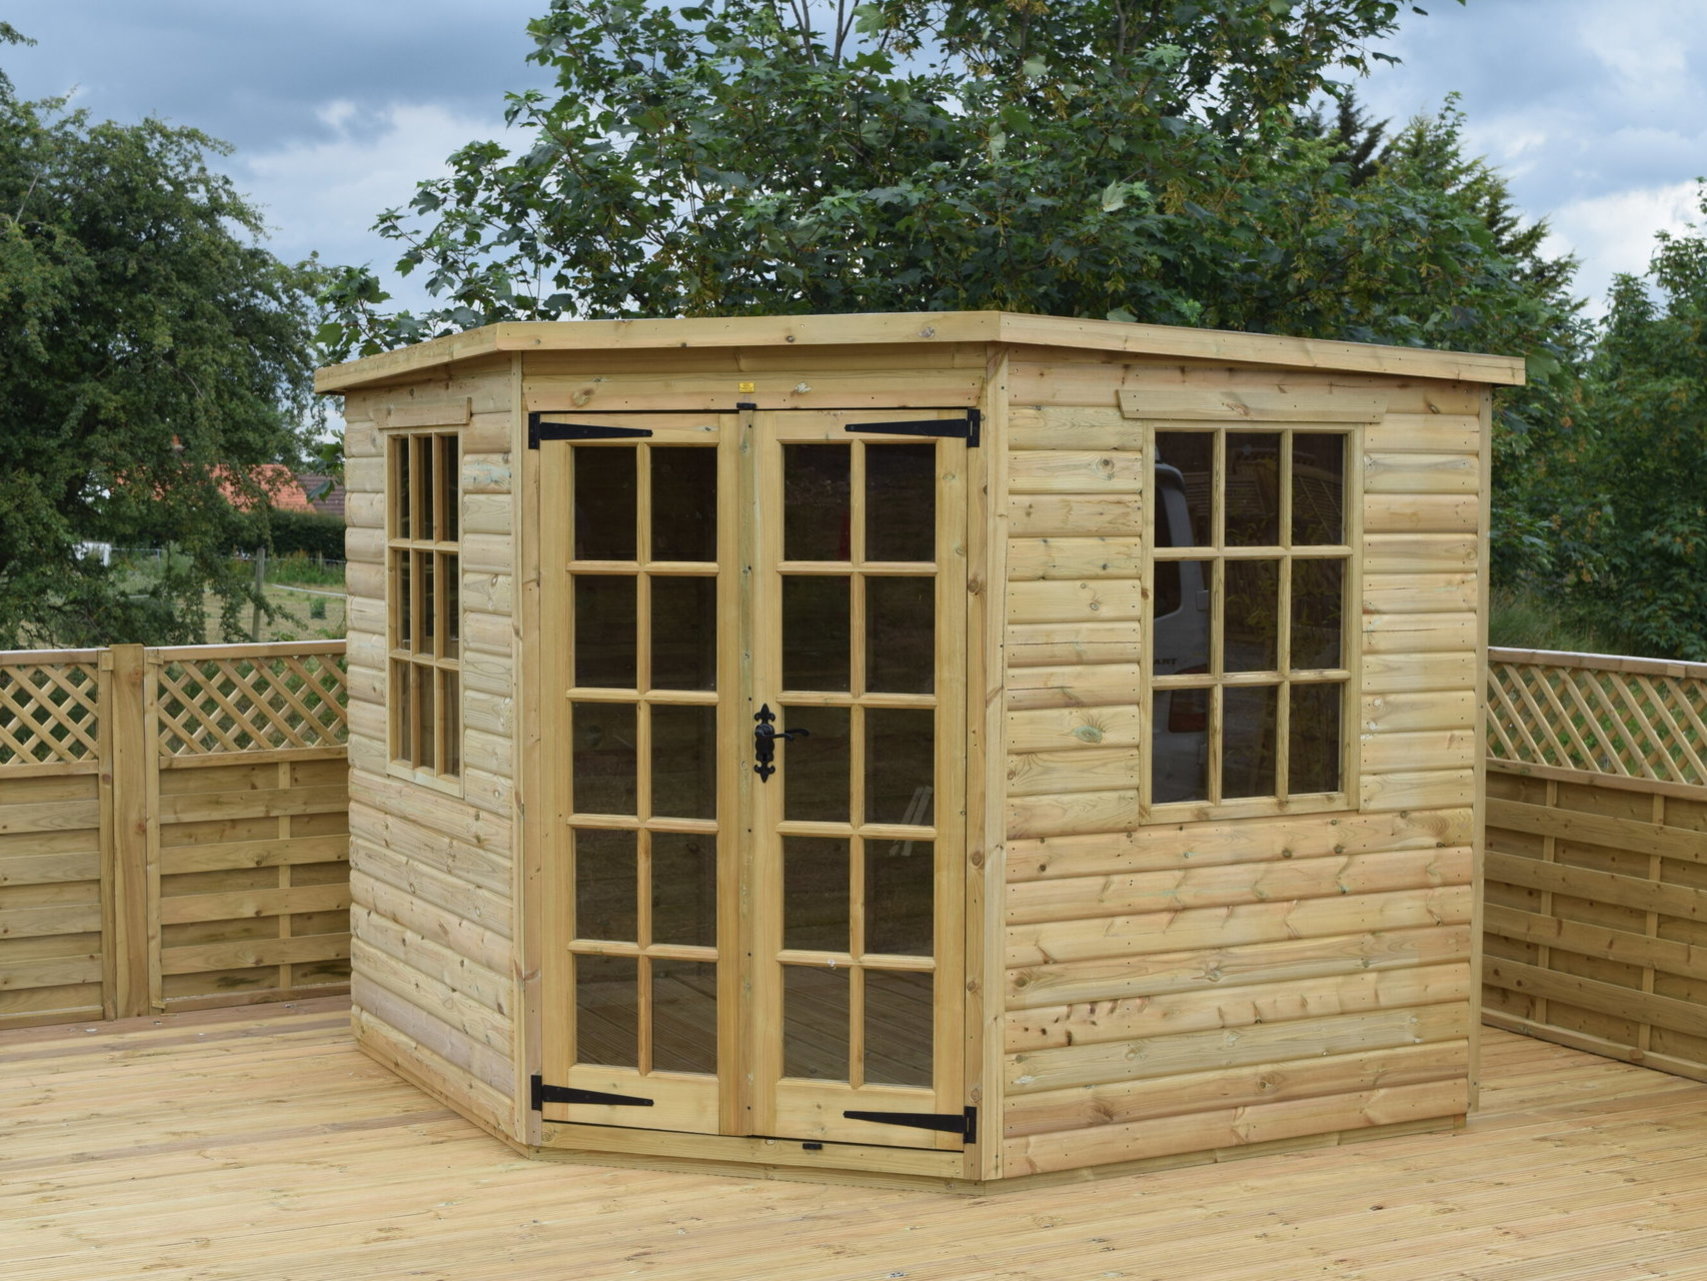 An image of a shed on a decking